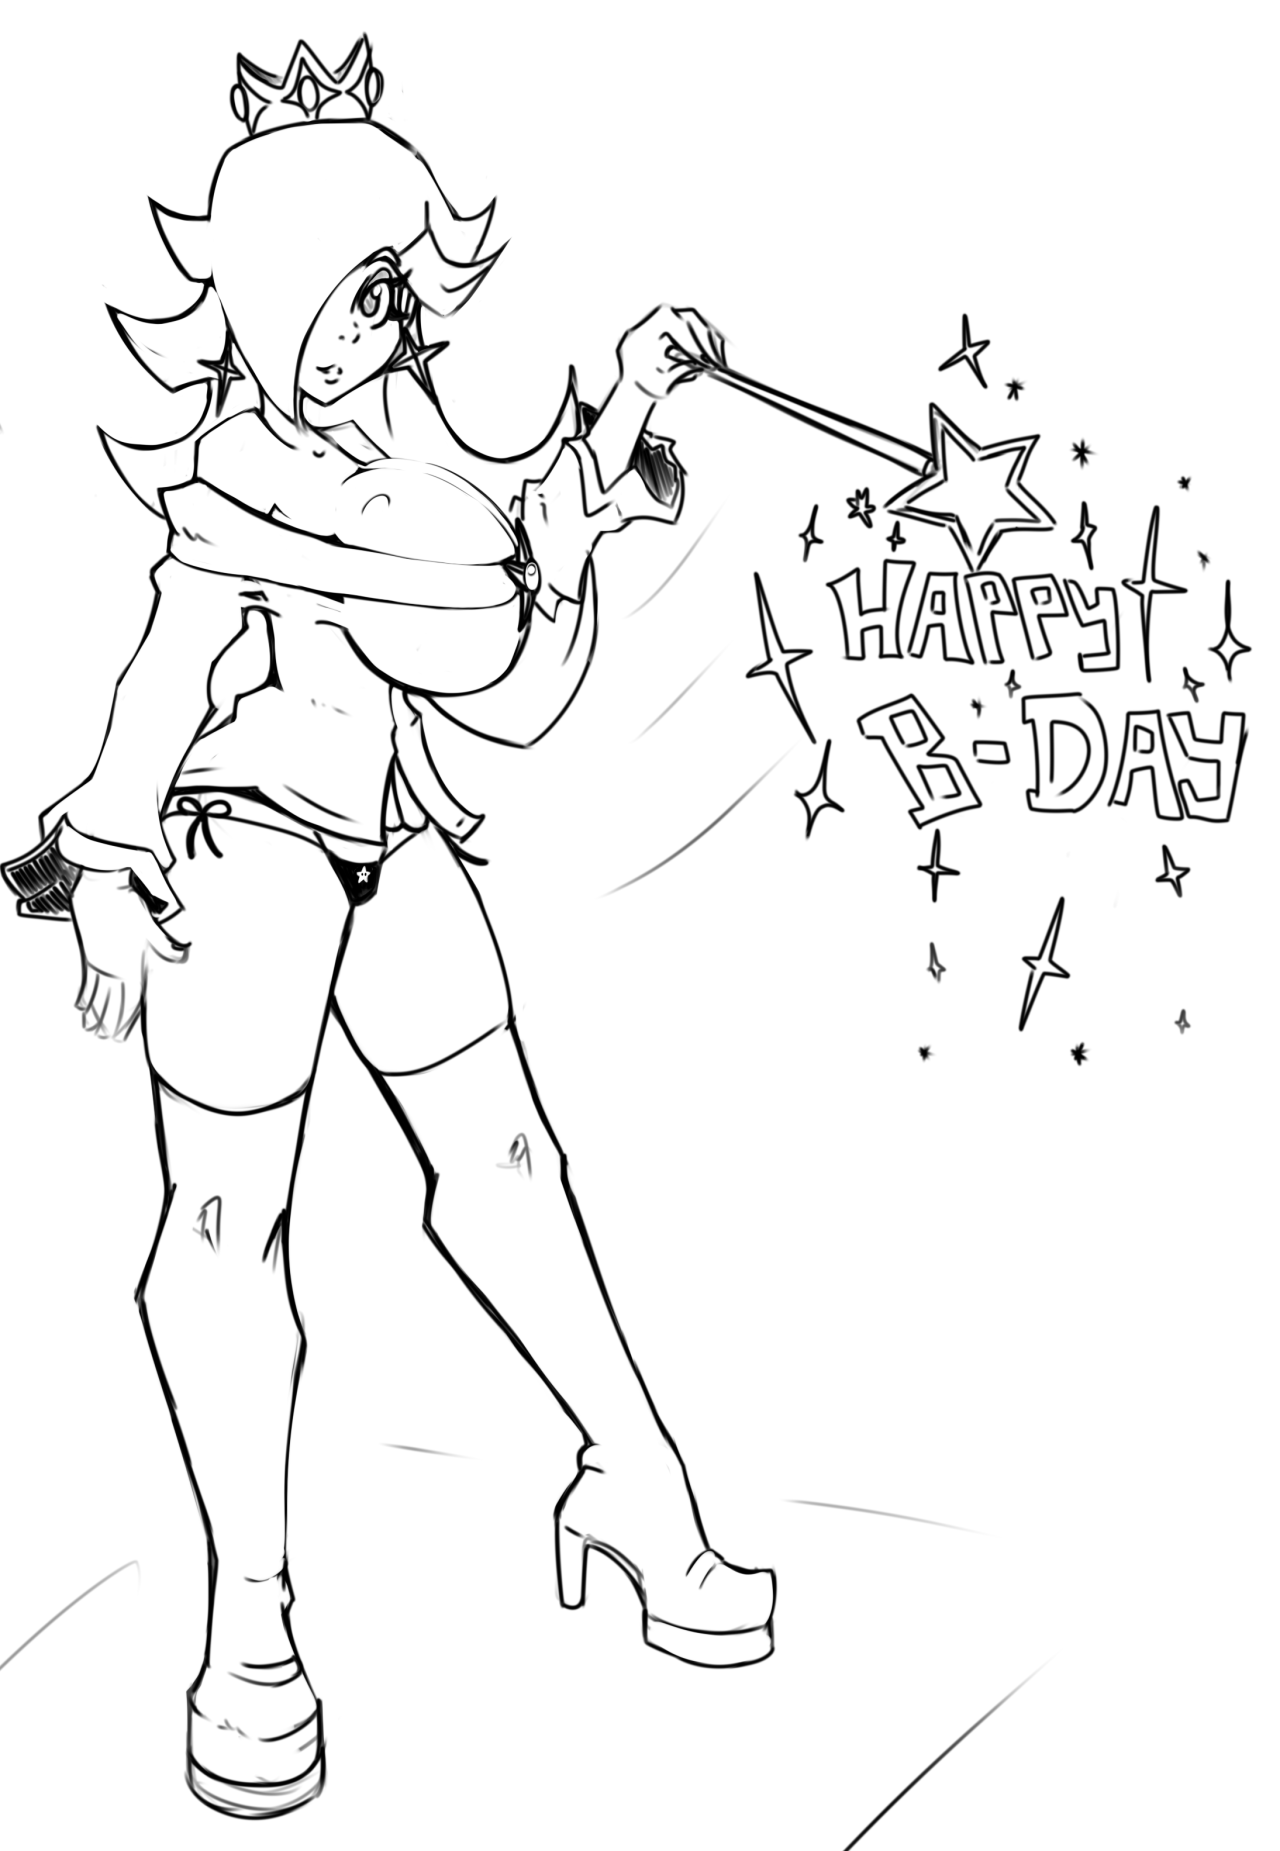 reliusmax:  Sketch of Rosalina for a friendo being his B-day n such stuff.   &lt;